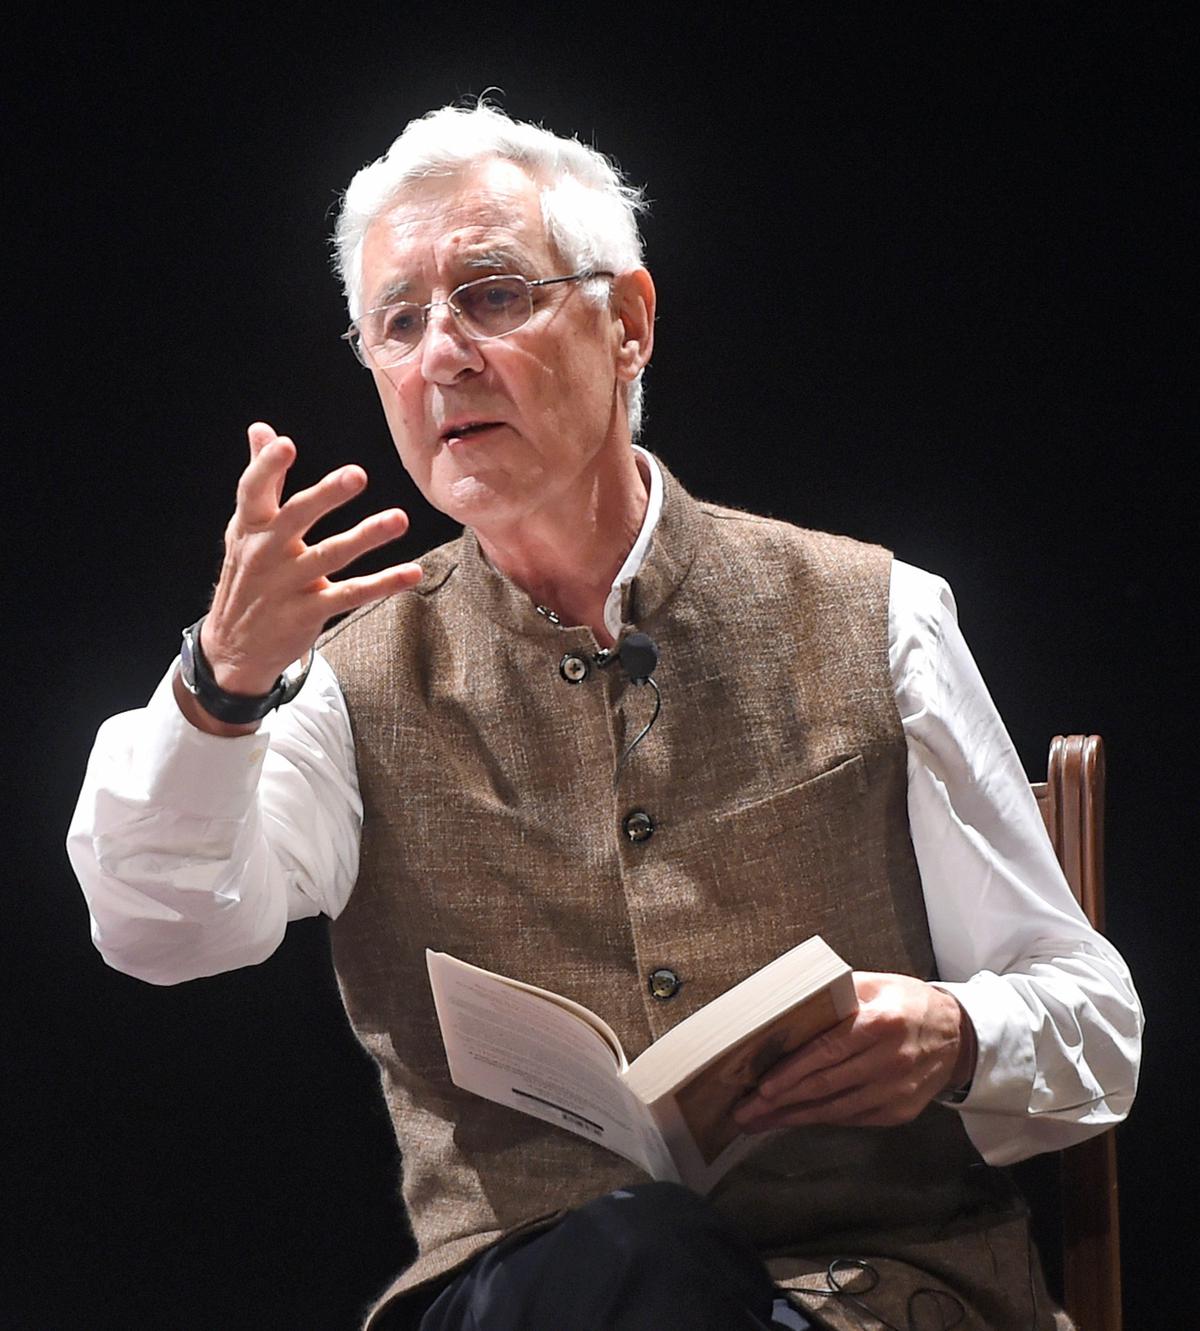 Mike Brearley at an event in Mumbai.